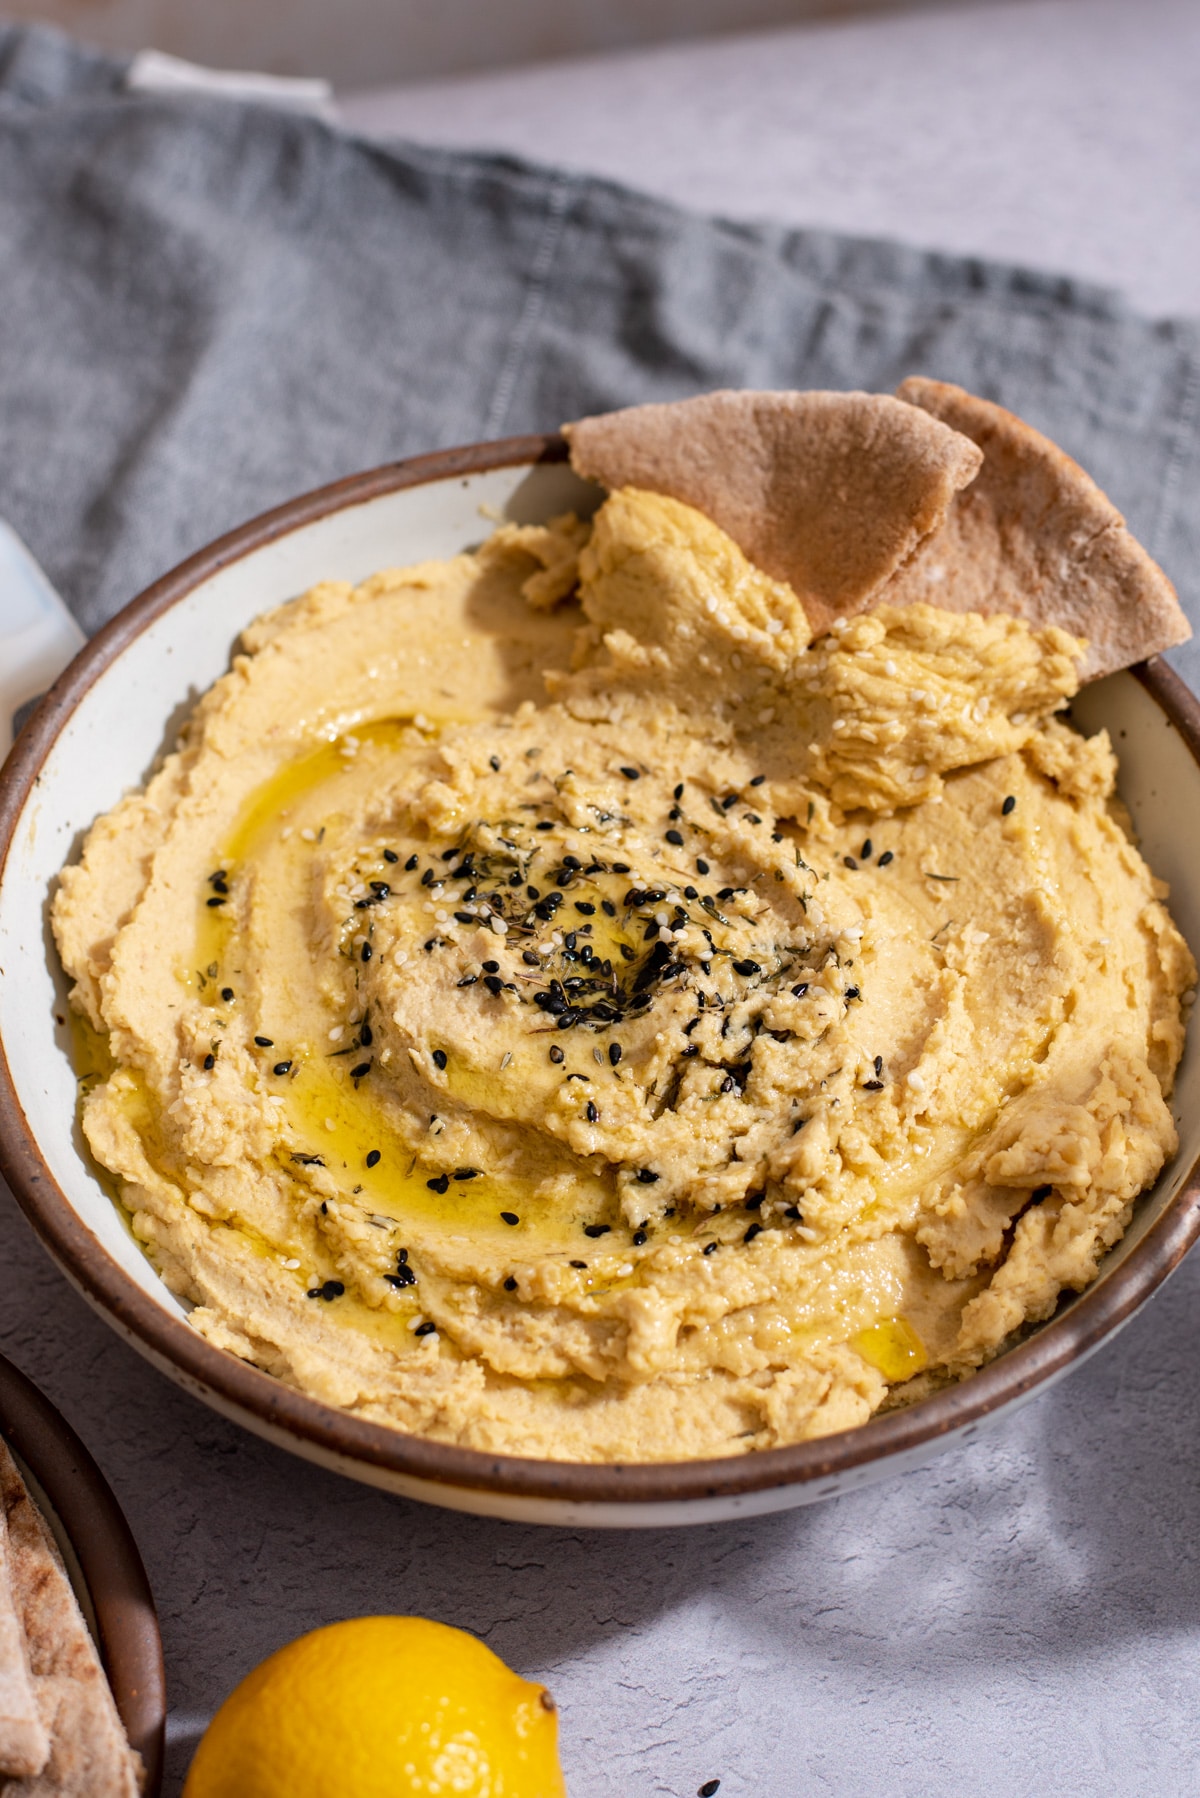 White bowl filled with hummus and pita bread.